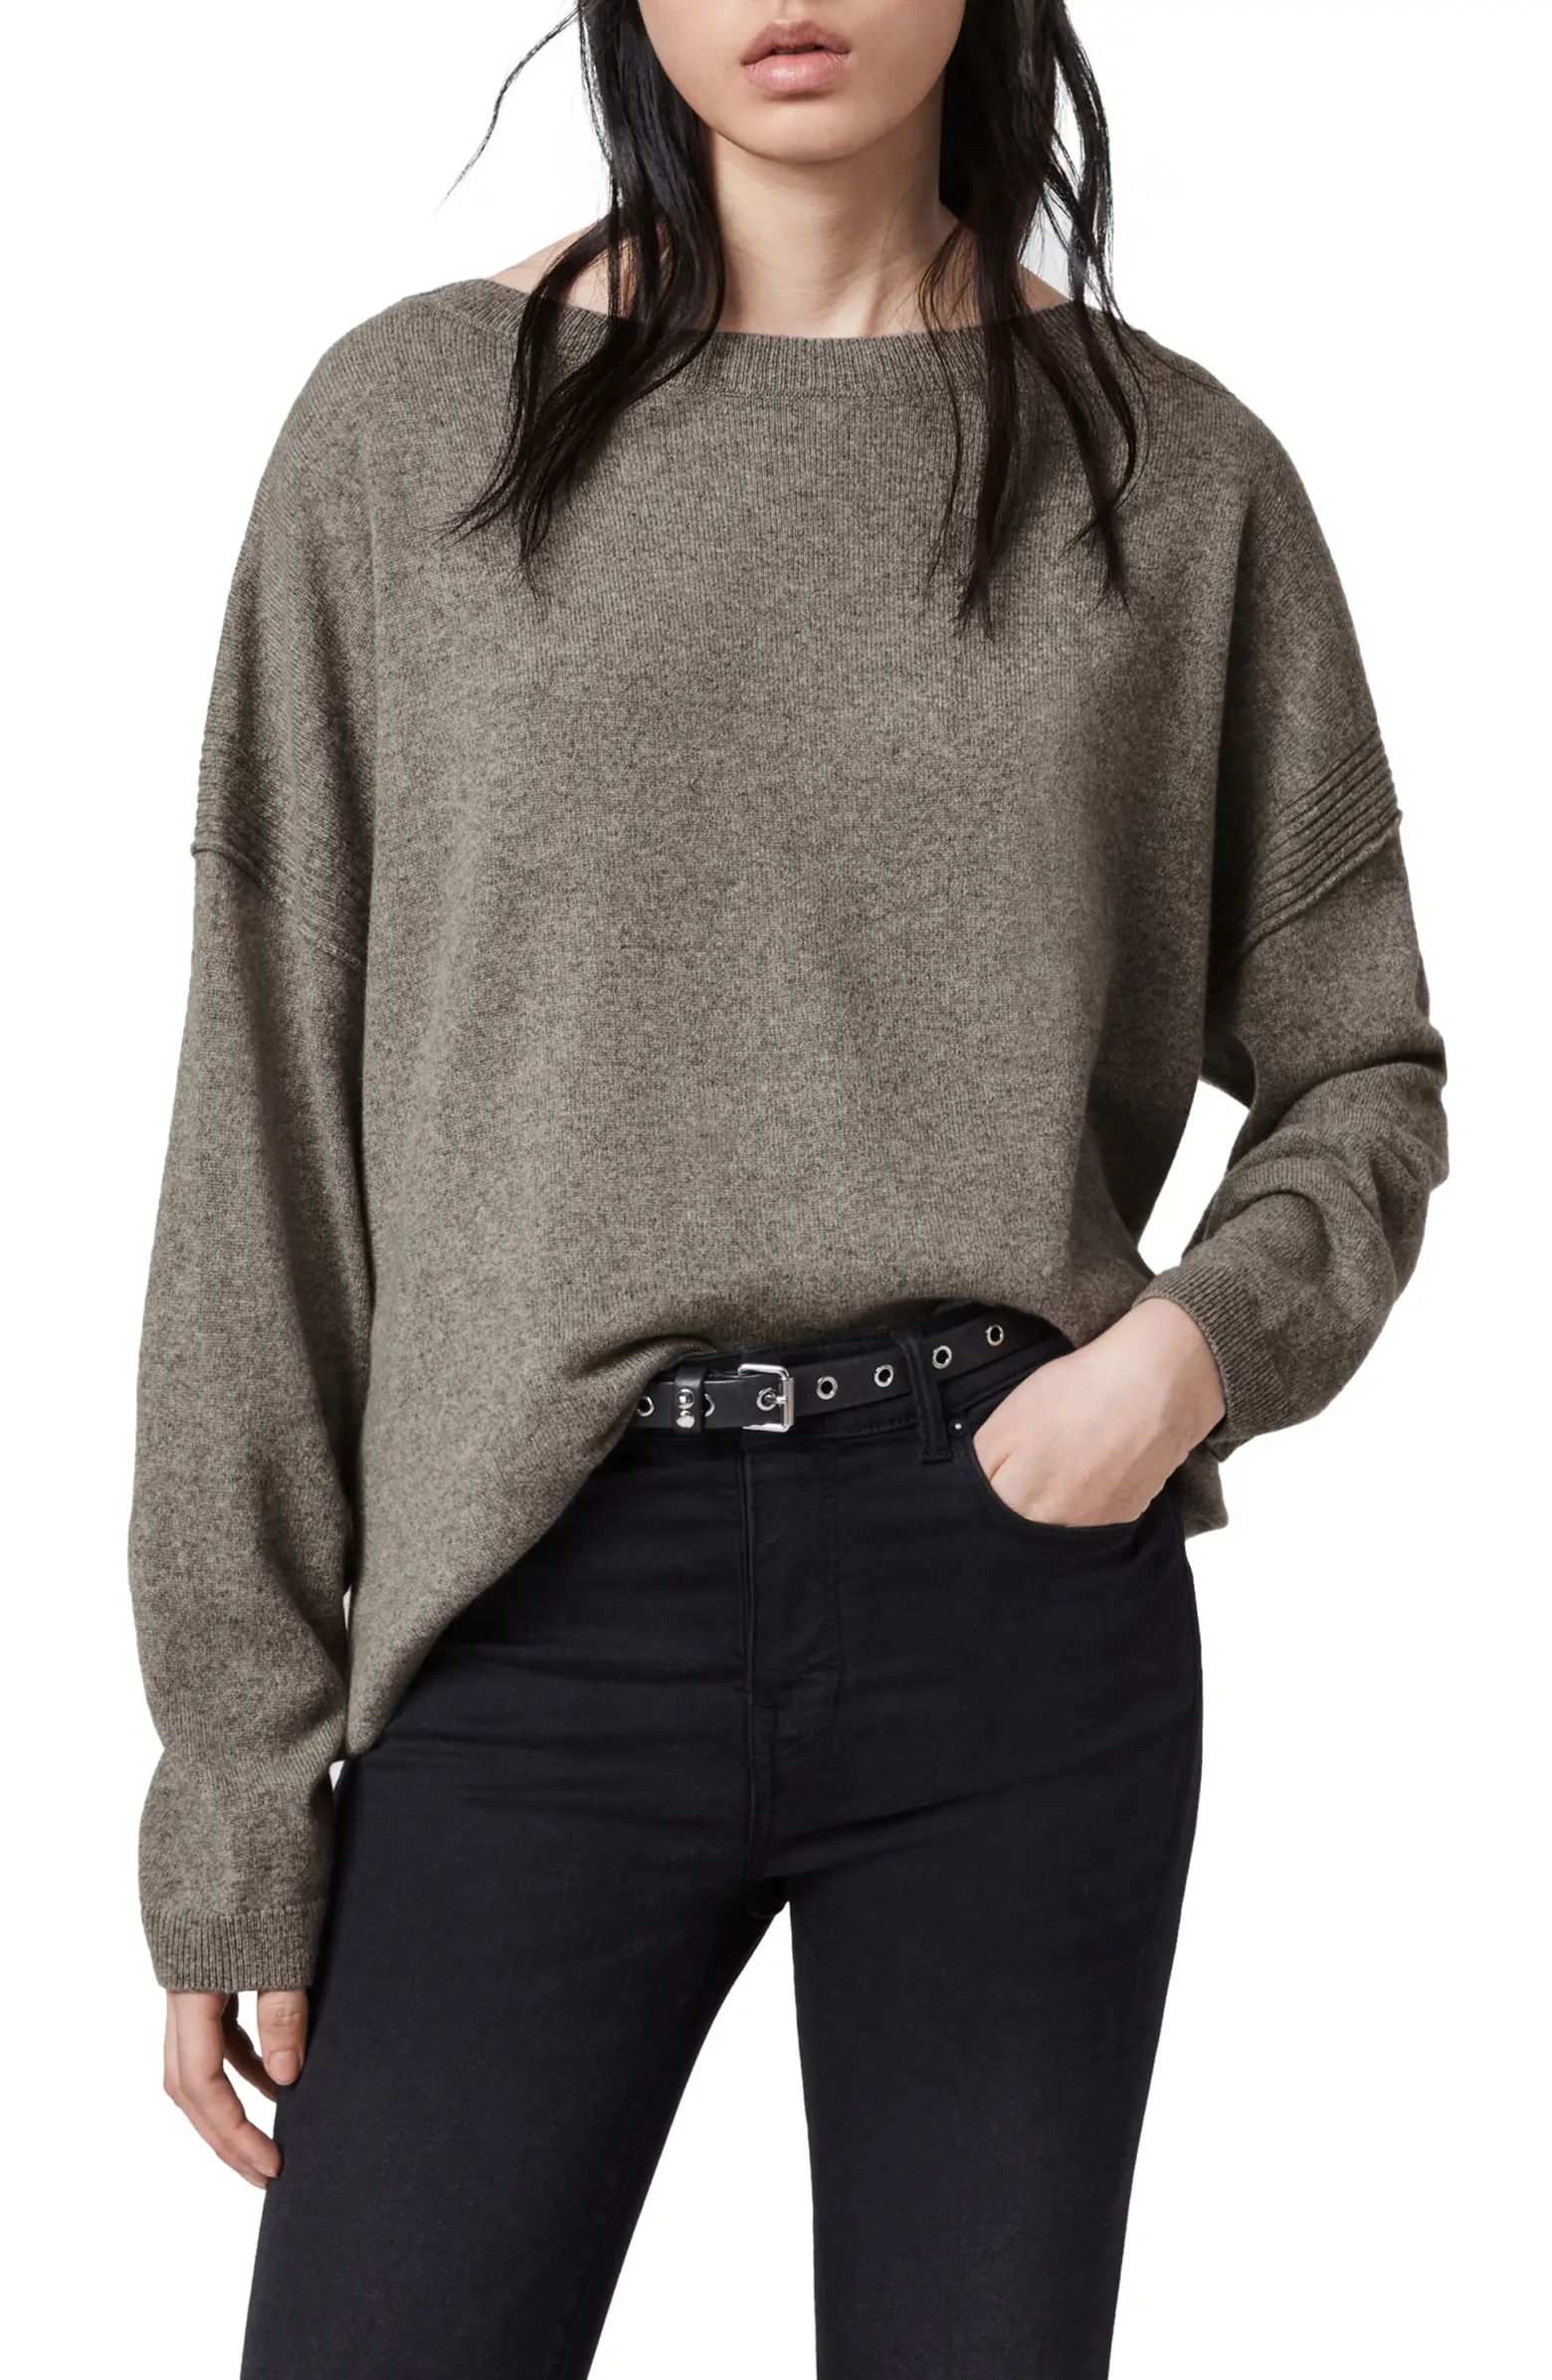 ALLSAINTS Tara Sweater, Main, color, FAWN GREYSize InfoTrue to size.XS=00-0, S=2-4, M=6-8, L=10.D... | Nordstrom